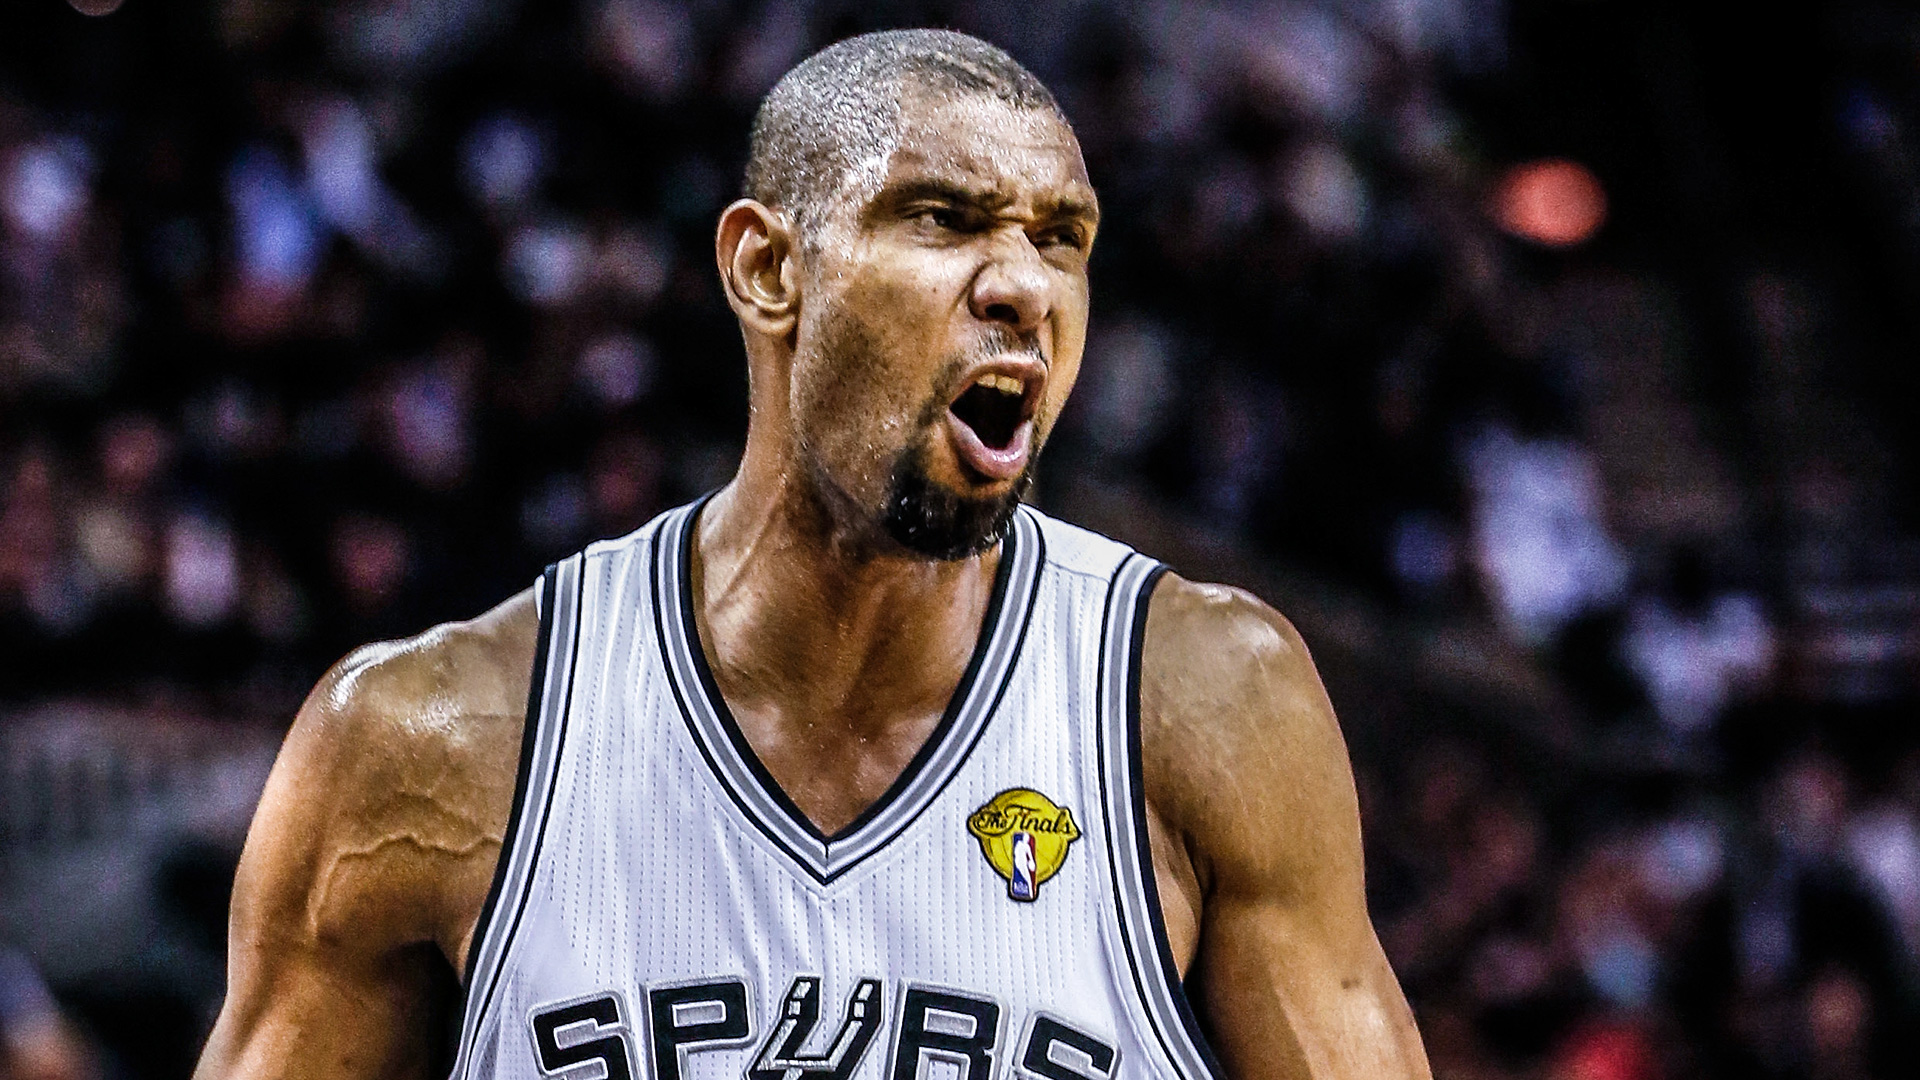 Tim Duncan Wallpaper High Resolution And Quality